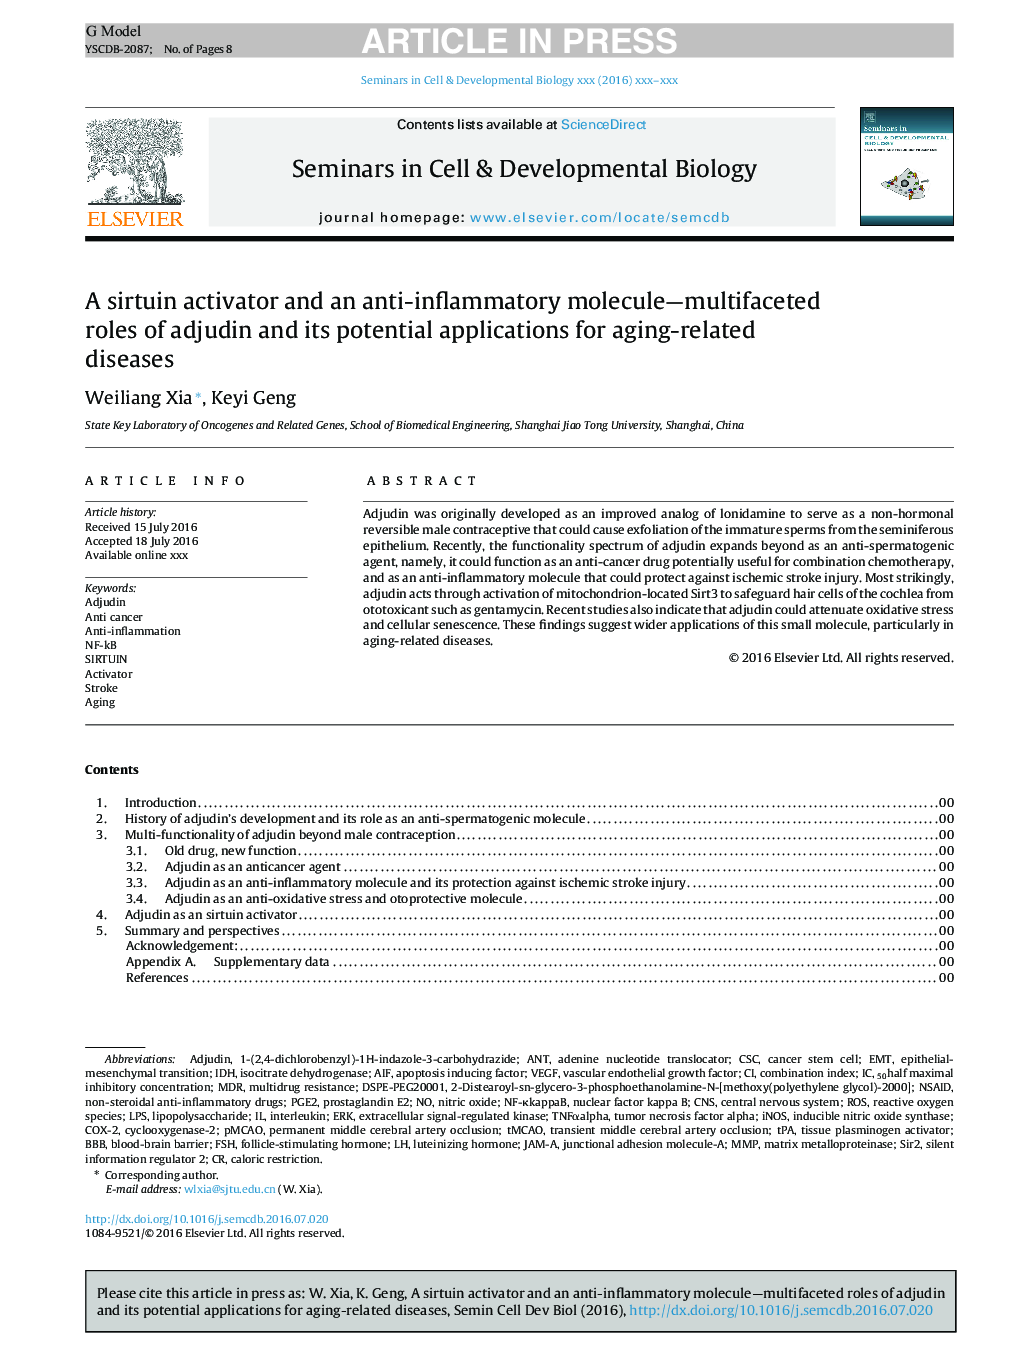 A sirtuin activator and an anti-inflammatory molecule-multifaceted roles of adjudin and its potential applications for aging-related diseases